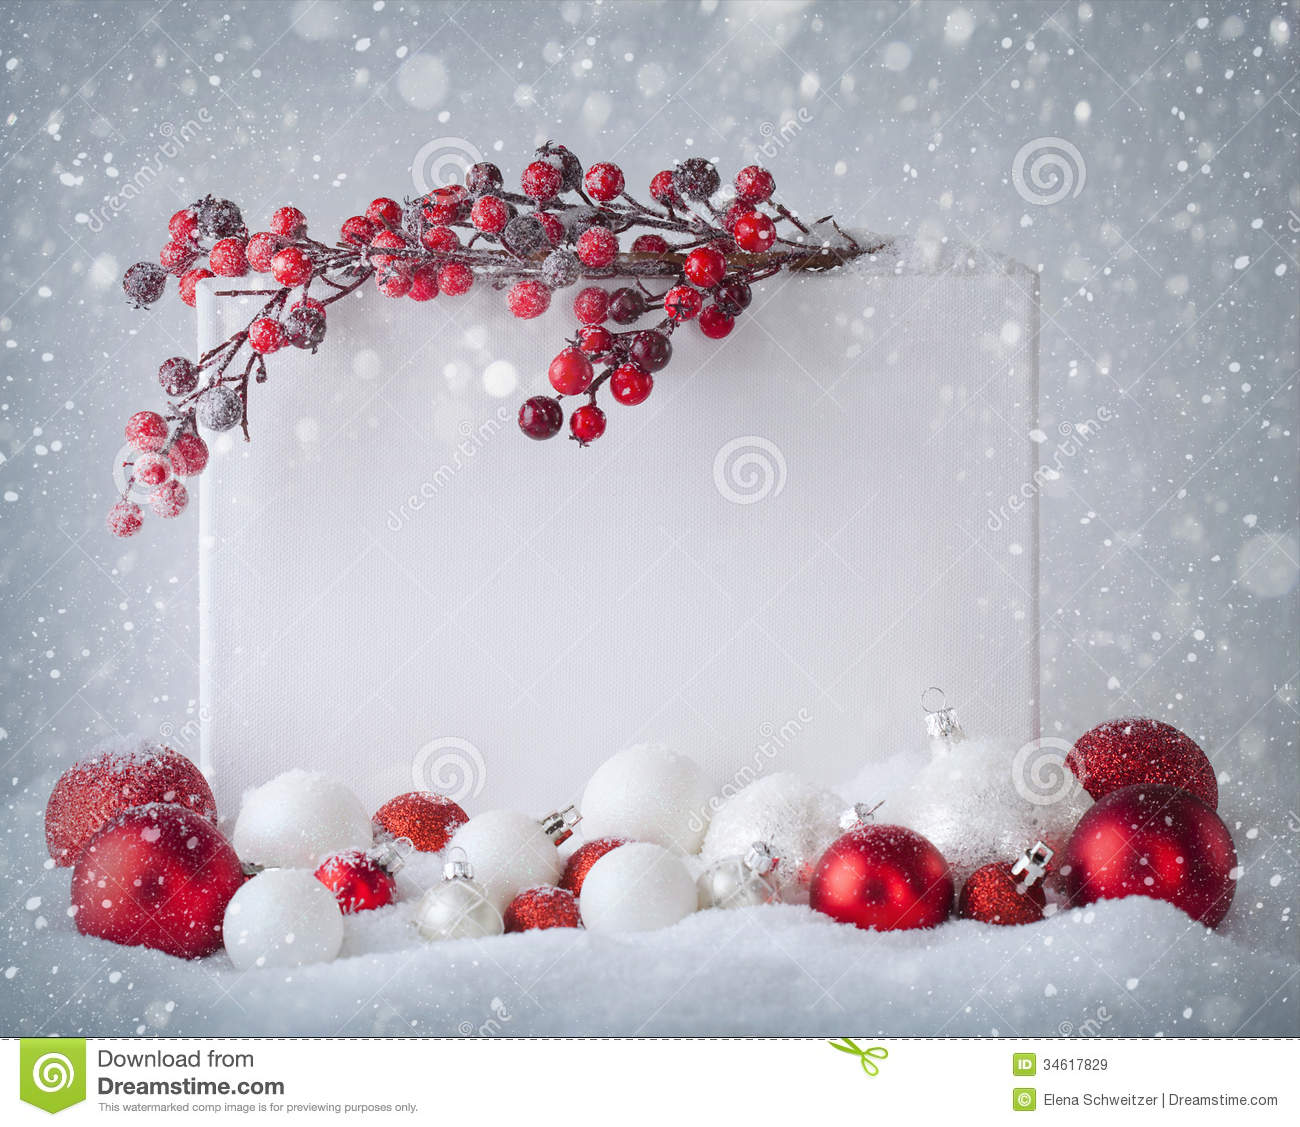 Detail Free Christmas Images To Download Nomer 38